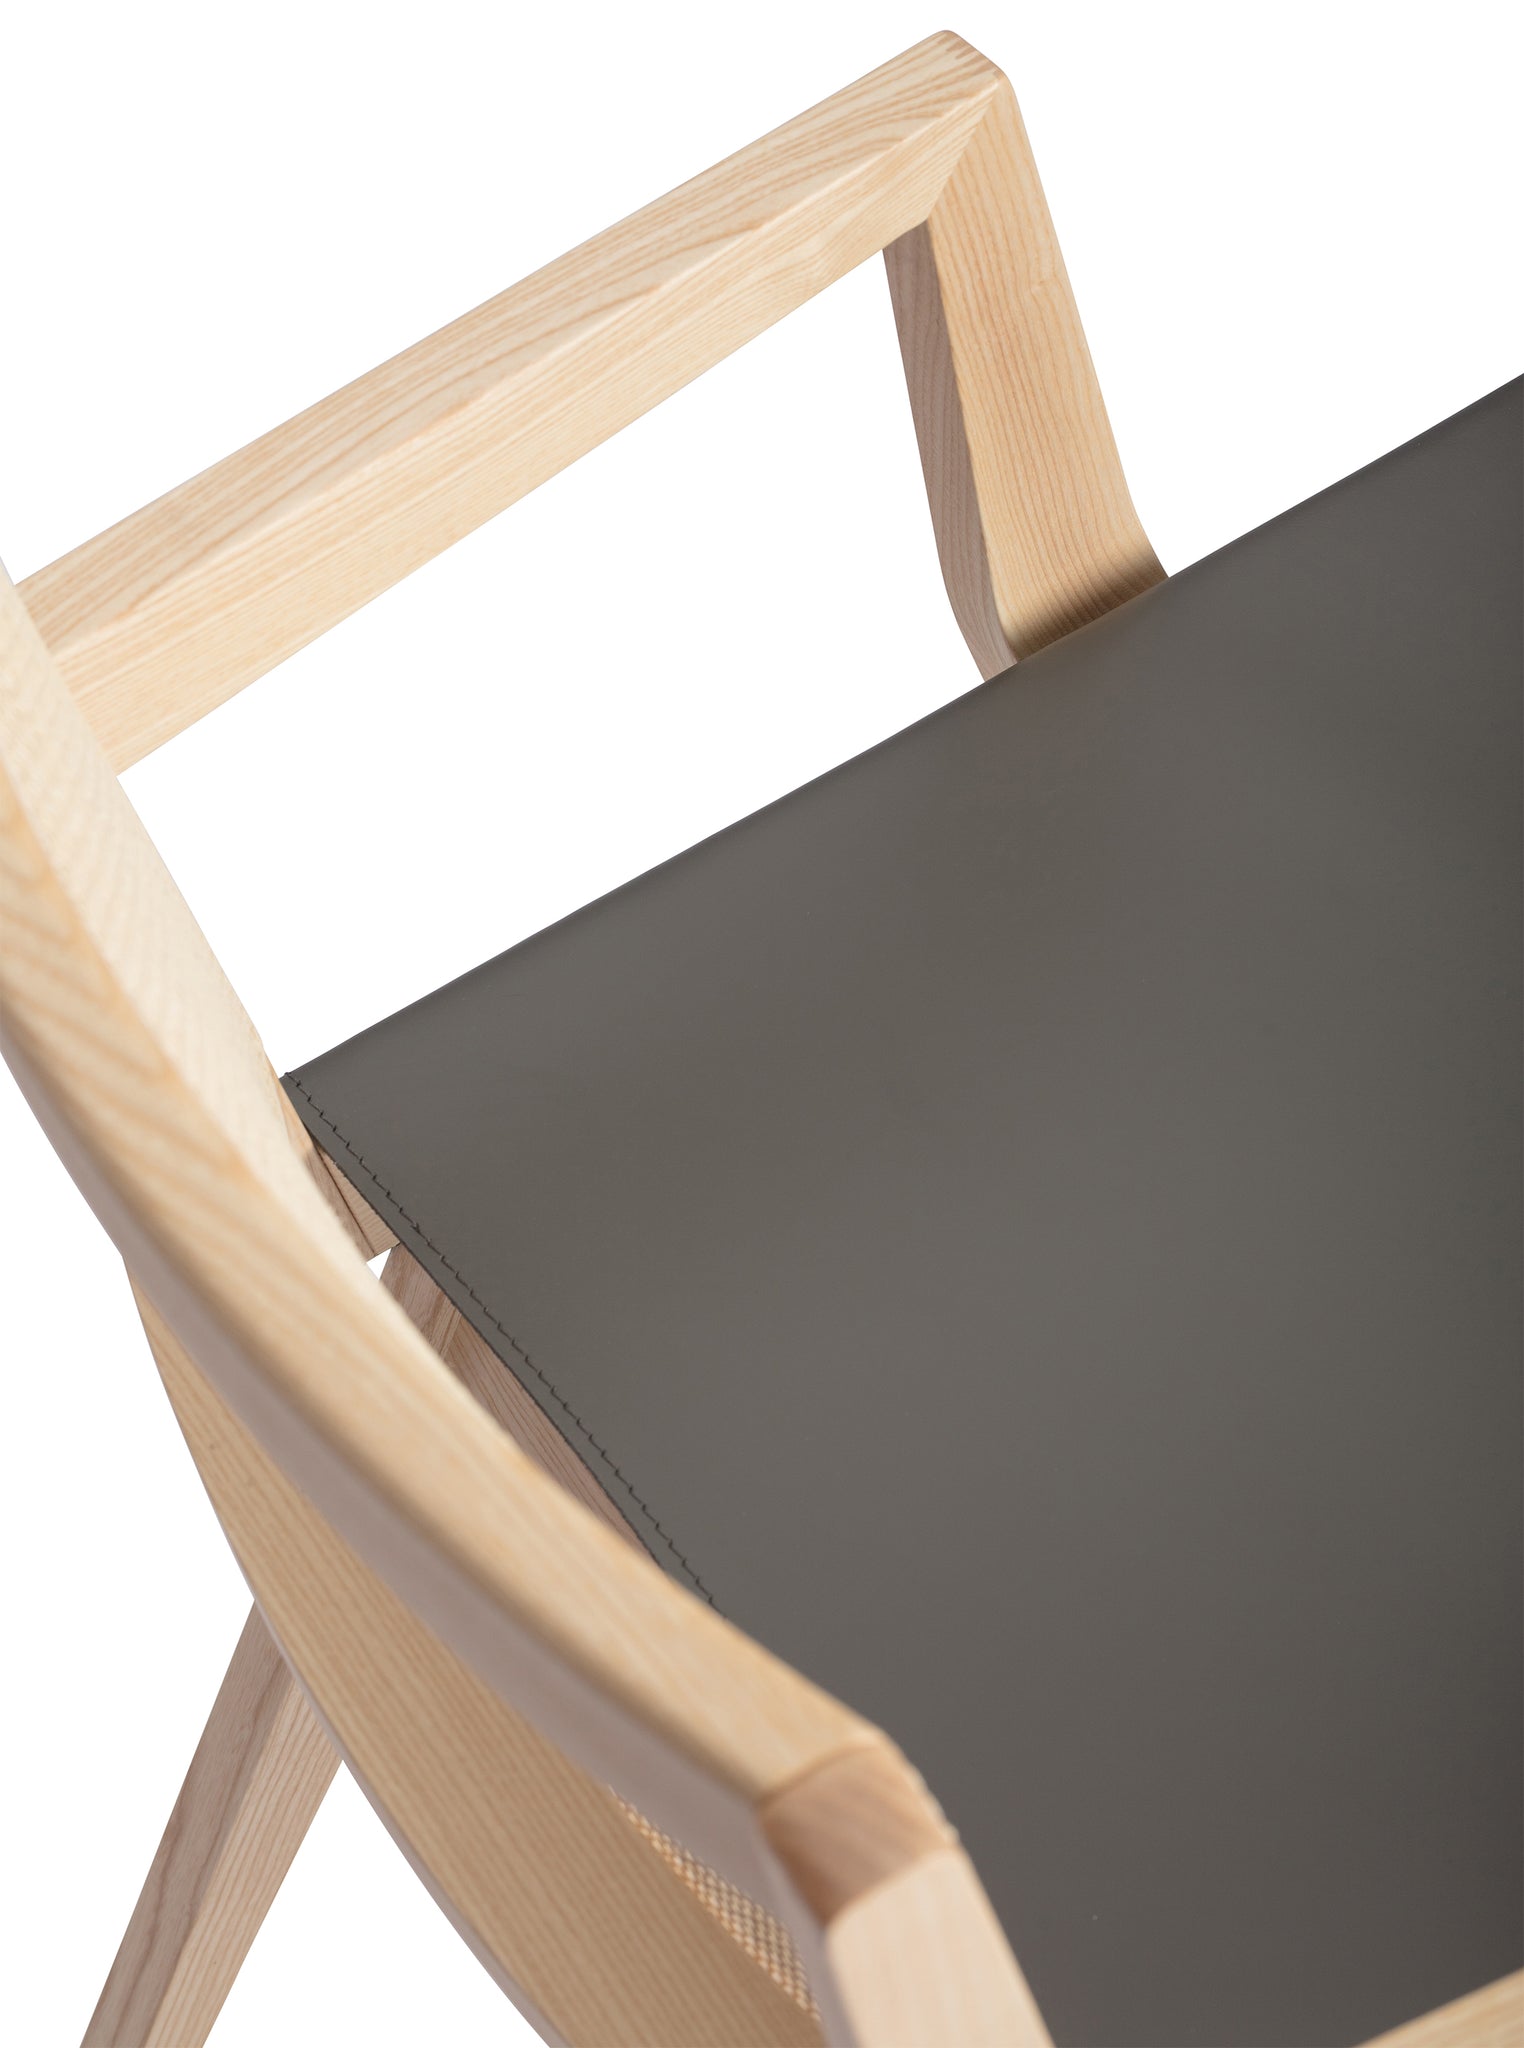 Close-up 2 of an "Elye" designer dining chair, walnut stained ash frame, square weave cane back, contract grade off white leather seat, produced by Klarel in Italy. #K40-3